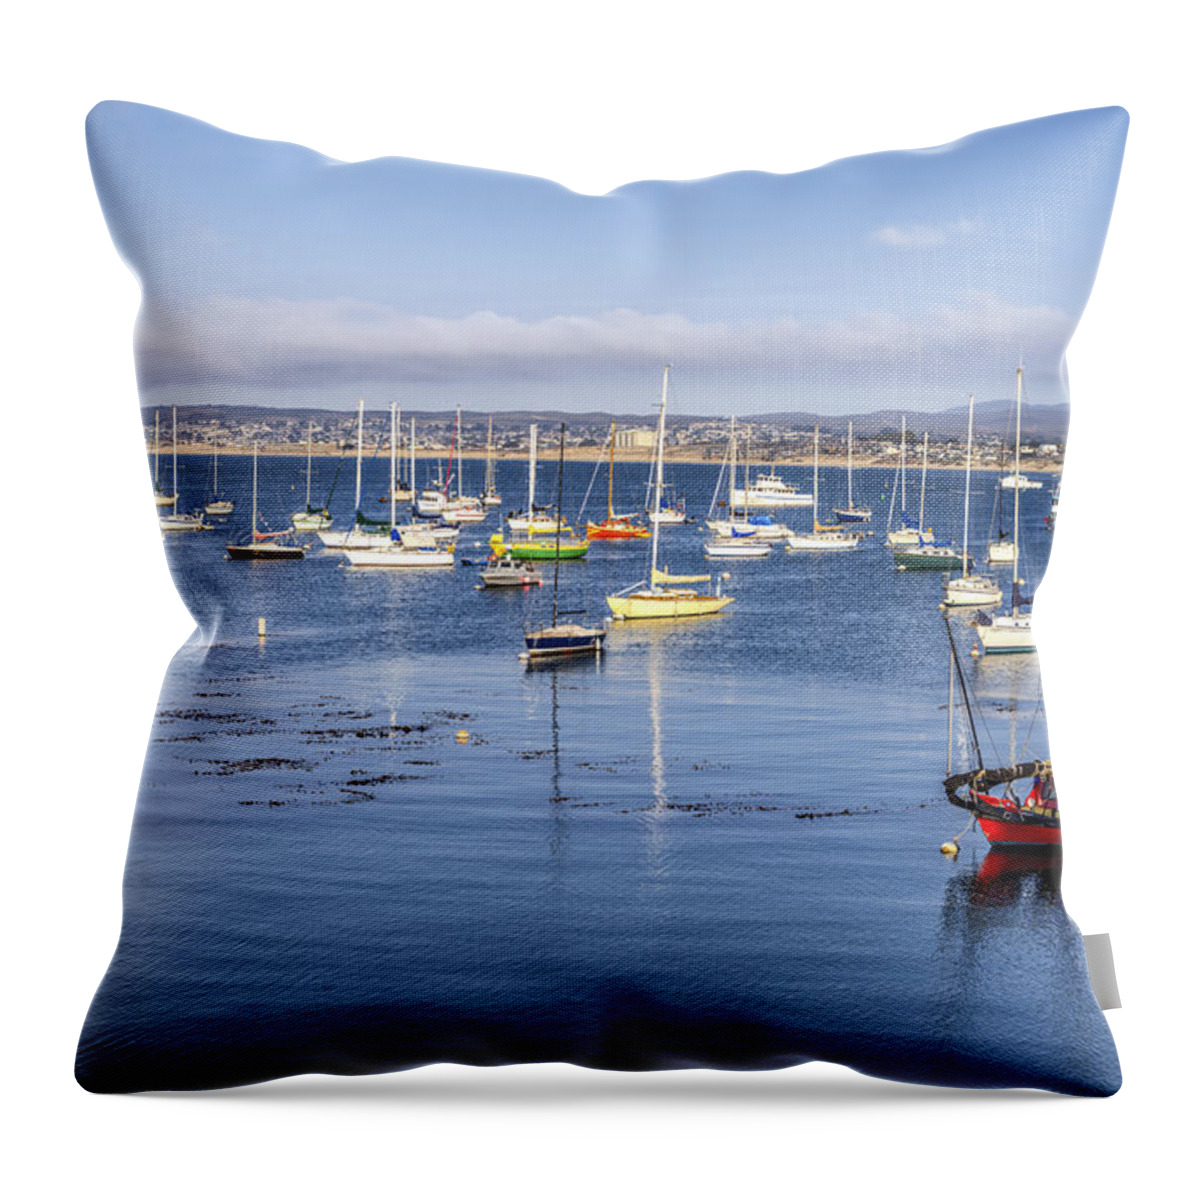 Monterey Bay Throw Pillow featuring the photograph Colorful Monterey Bay by Joseph S Giacalone